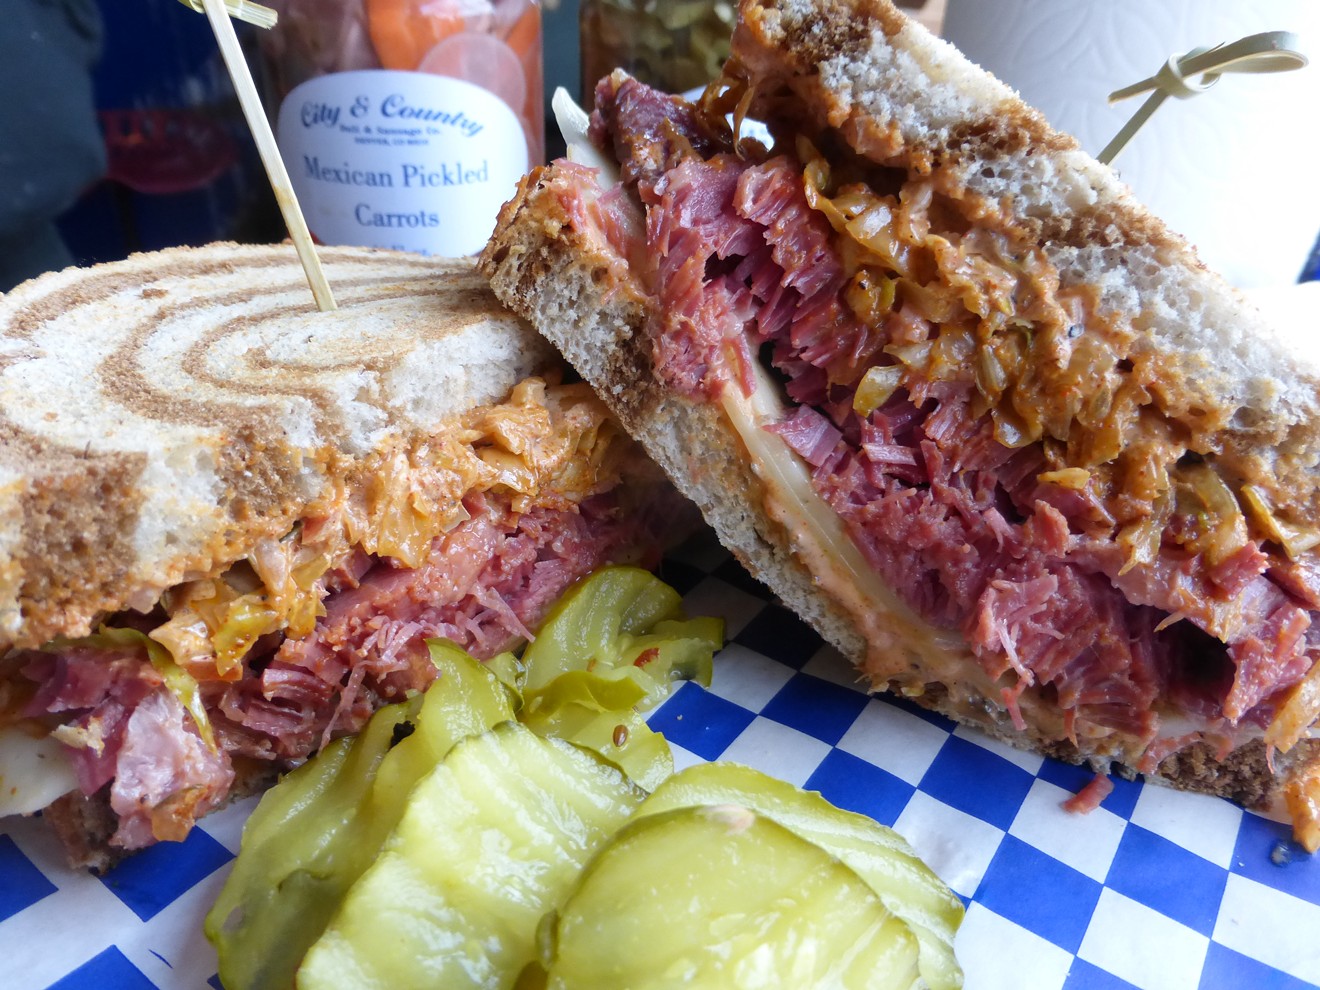 The Reuben at City & Country Deli & Sausage Co. is one hot sandwich.